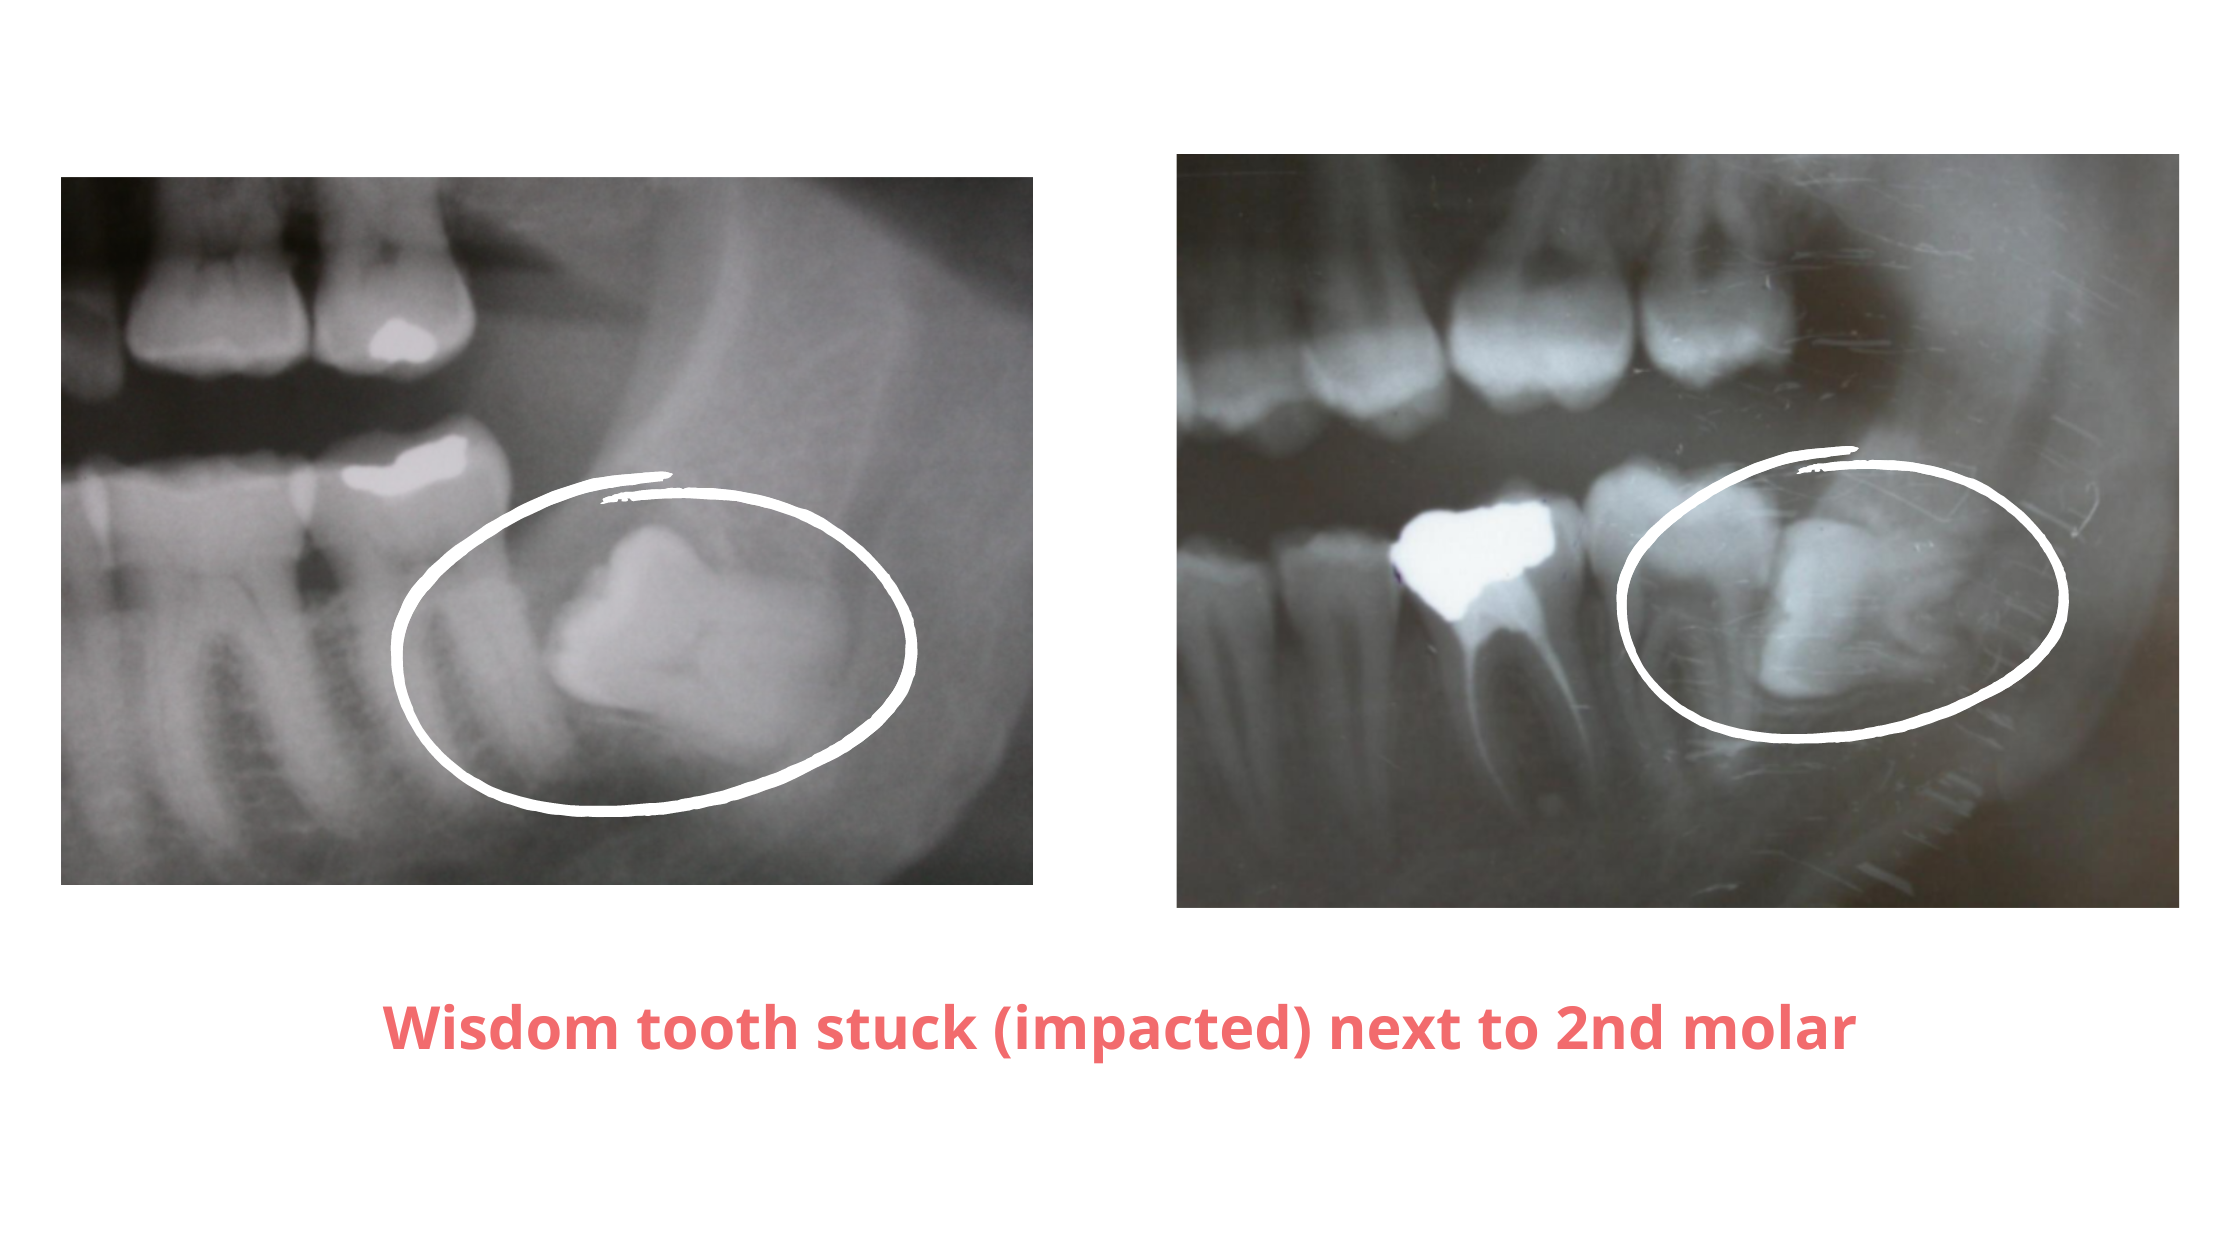 Dental X-rays showing impacted lower wisdom teeth stuck next to the second molars